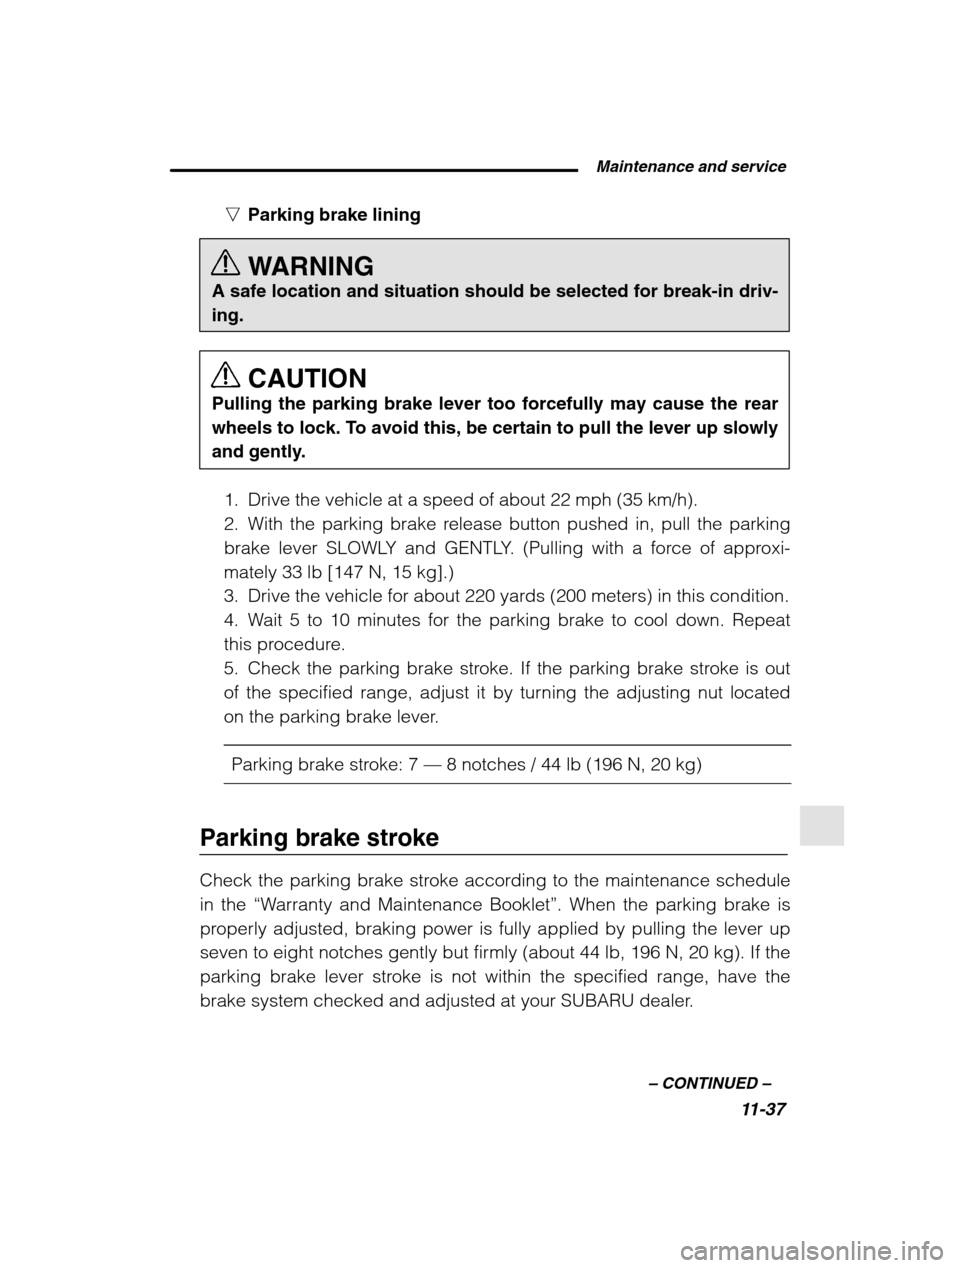 SUBARU OUTBACK 2002 3.G Owners Manual  Maintenance and service11-37
–
 CONTINUED  –
nParking brake lining 
WARNING
A safe location and situation should be selected for break-in driv- ing.
CAUTION
Pulling the parking brake lever too fo